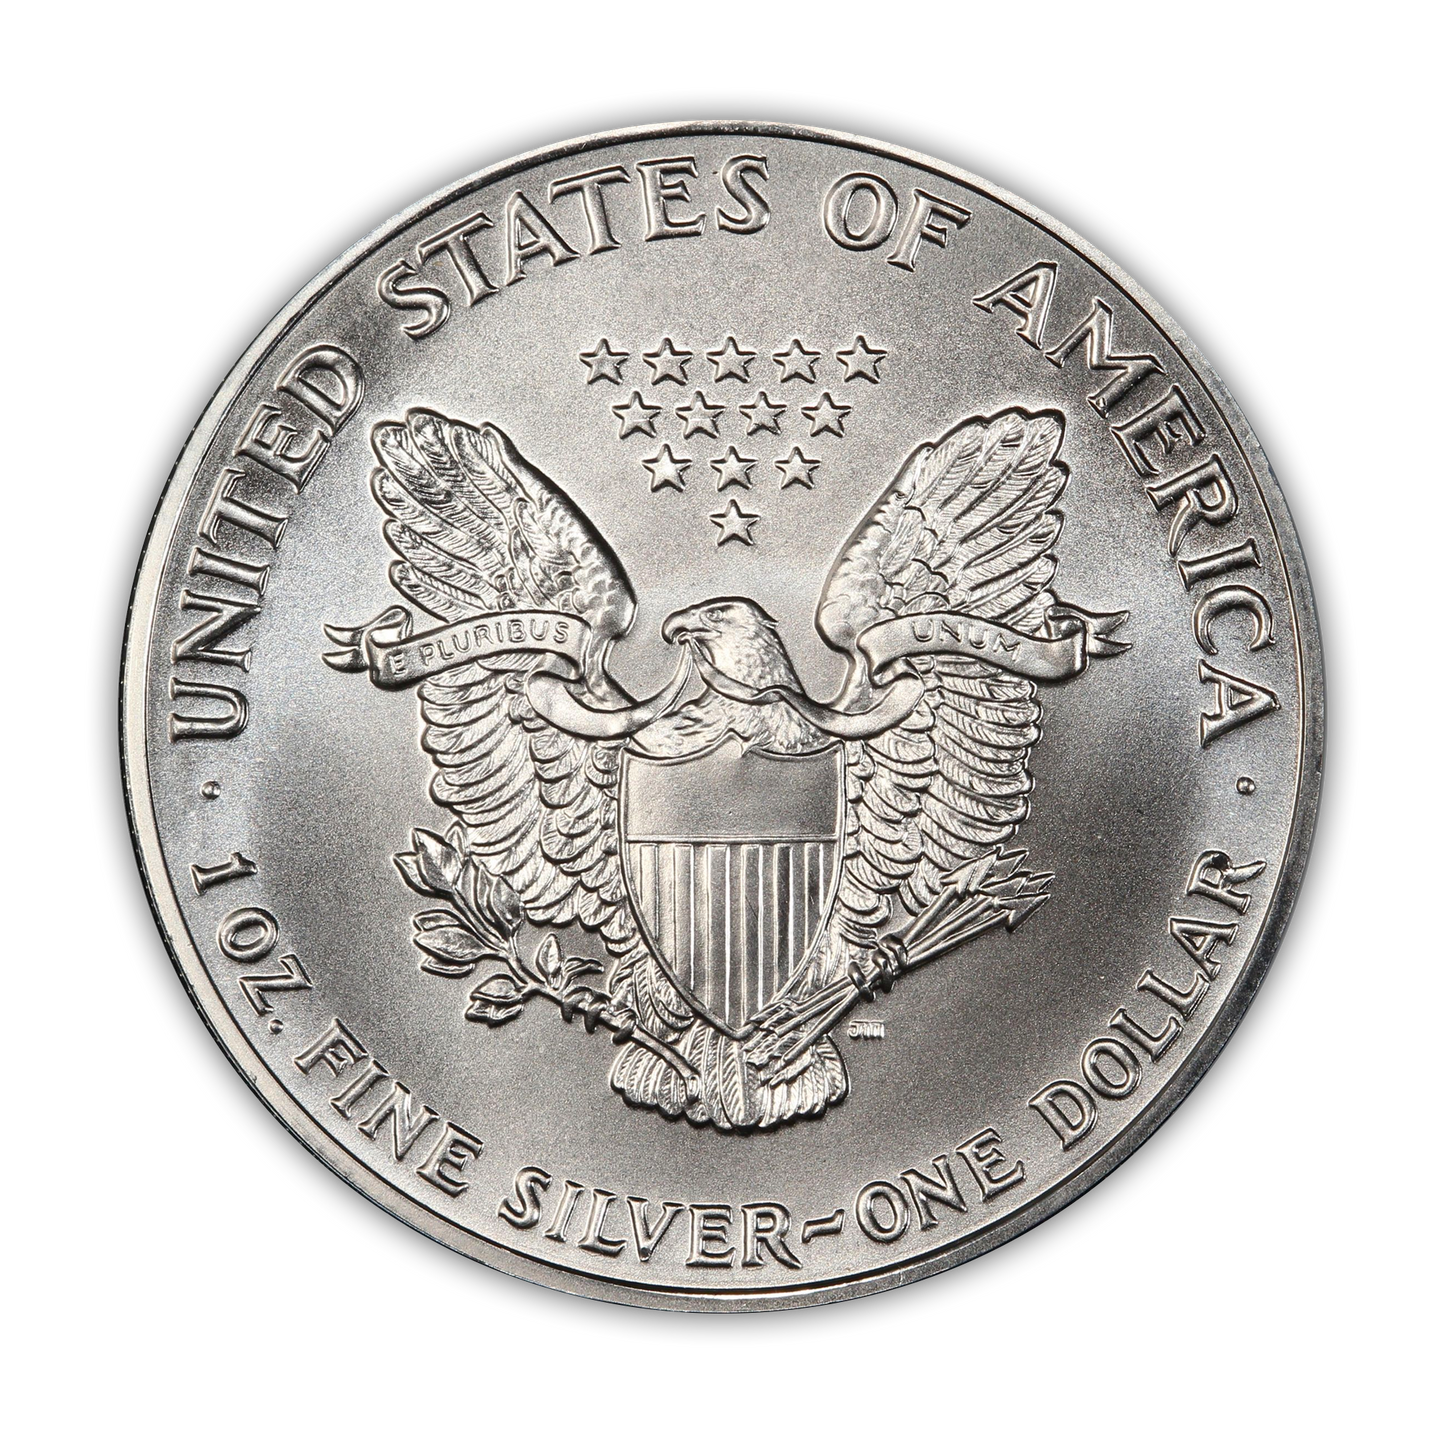 1992 Silver Eagle - Business Strike - Uncirculated - CoinsTV